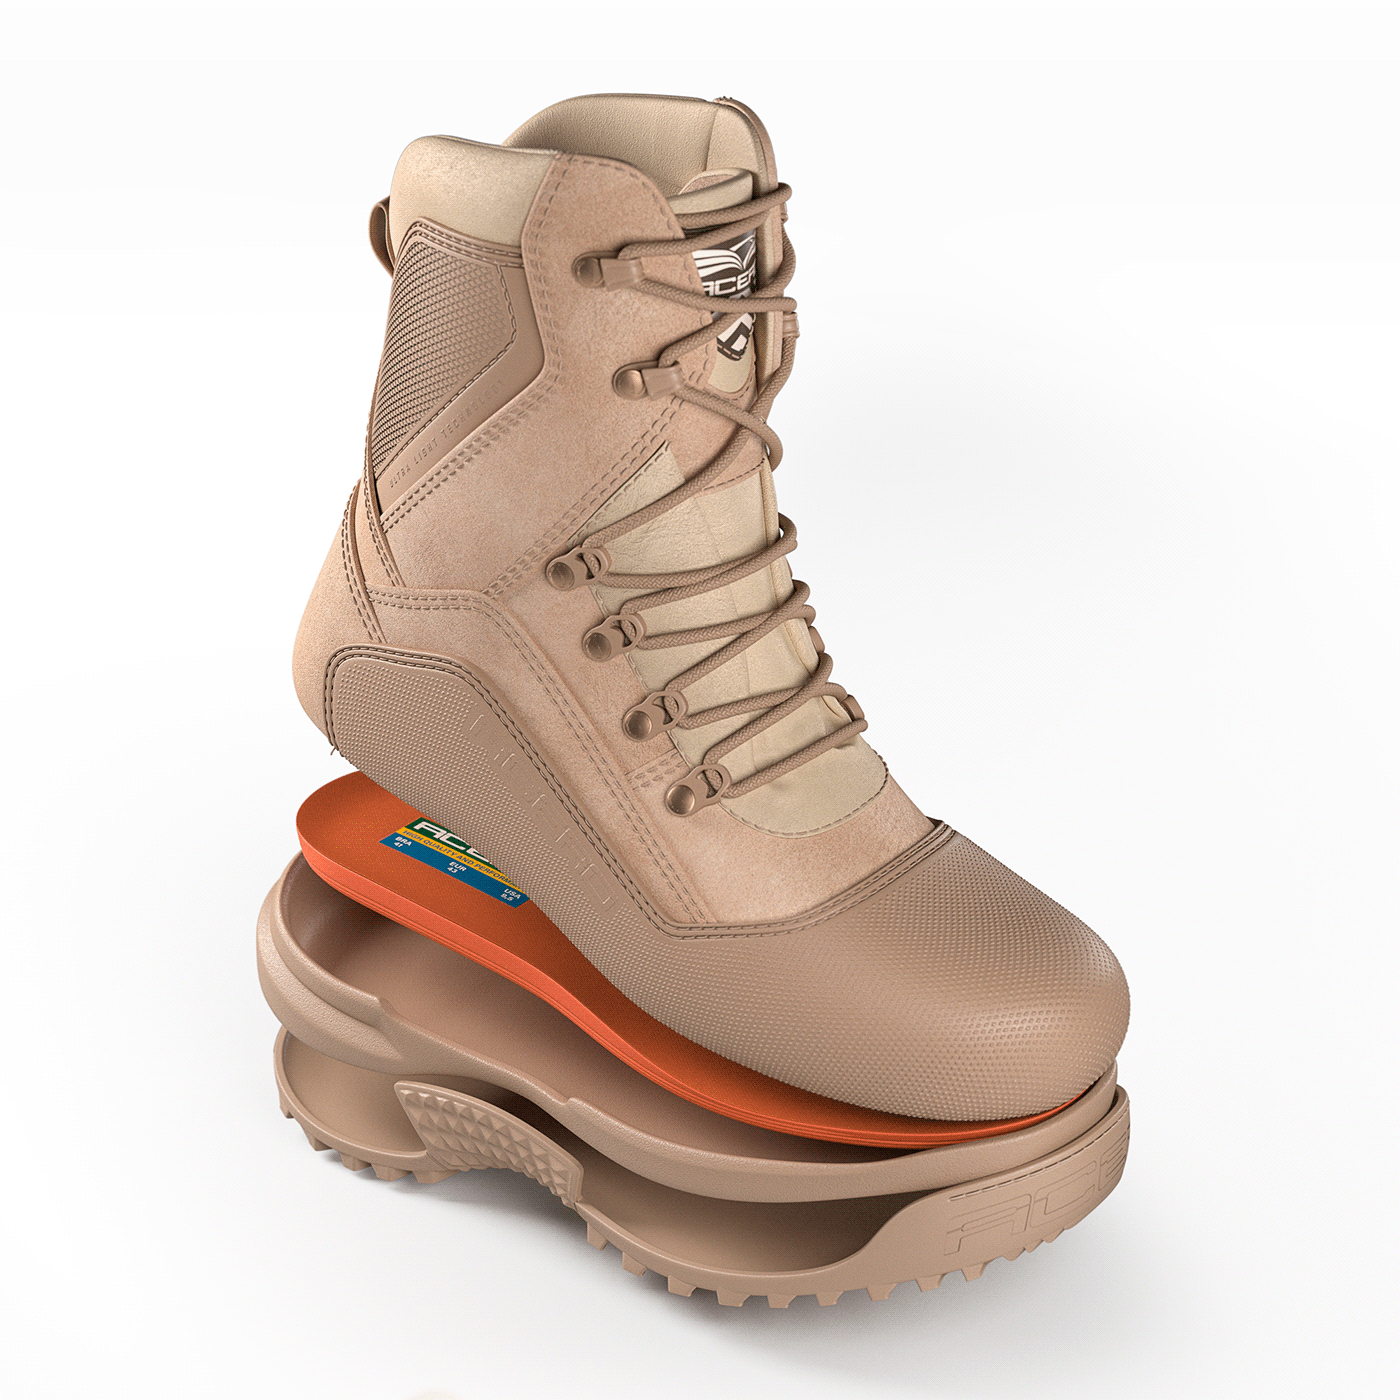 3d boot 3D Shoe boot boot animation cgi boot Military military boot military shoe shoe shoe animation